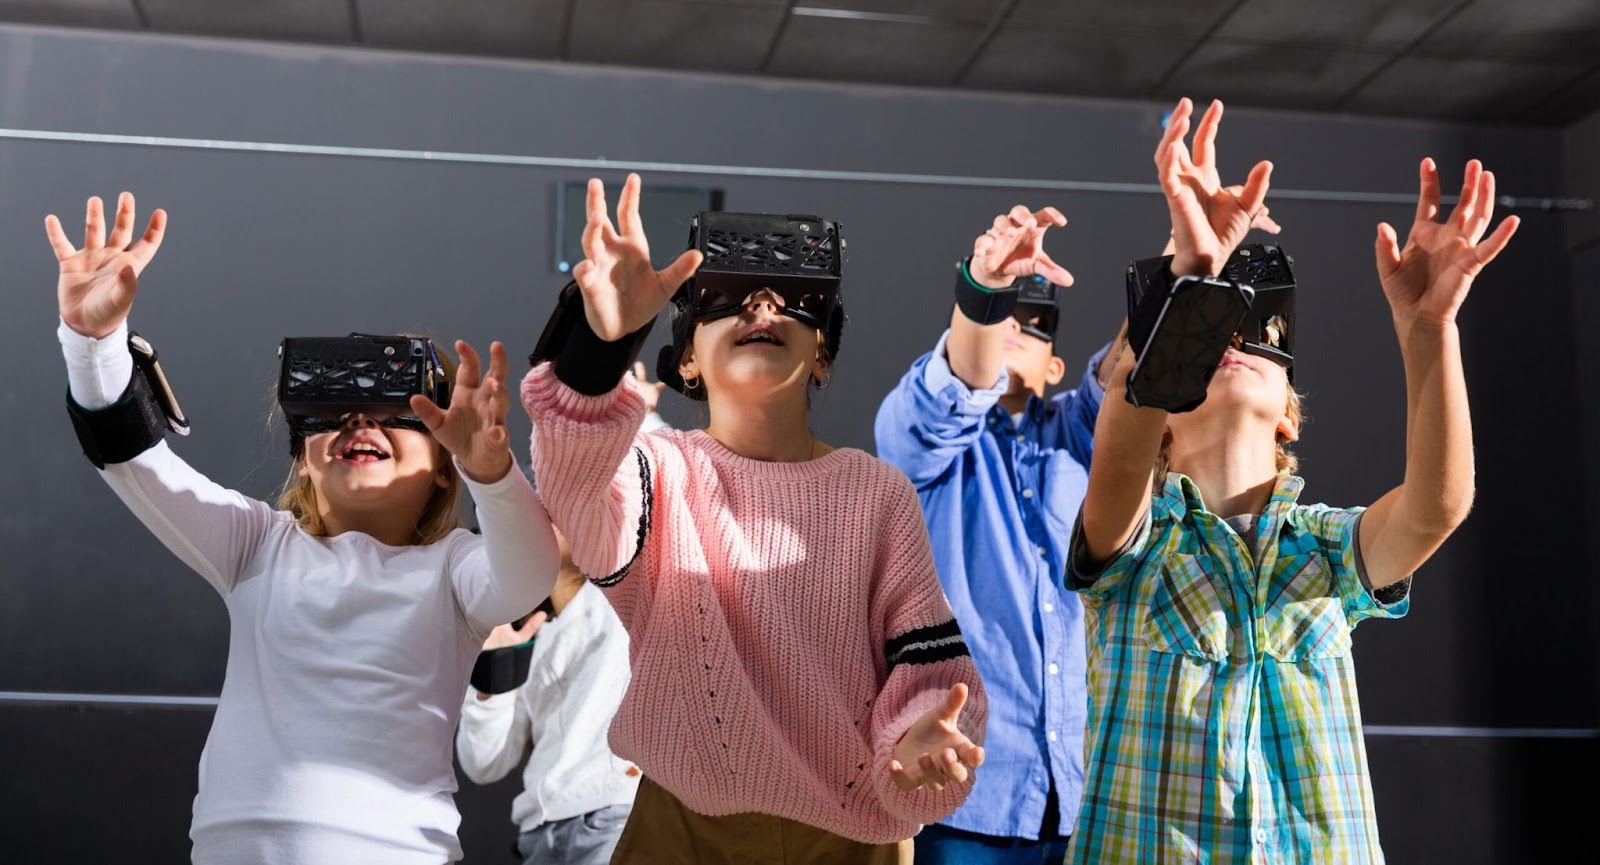 A group of Generation Alpha children experiencing virtual reality, reaching out with their hands, fully immersed and fascinated by the technology.